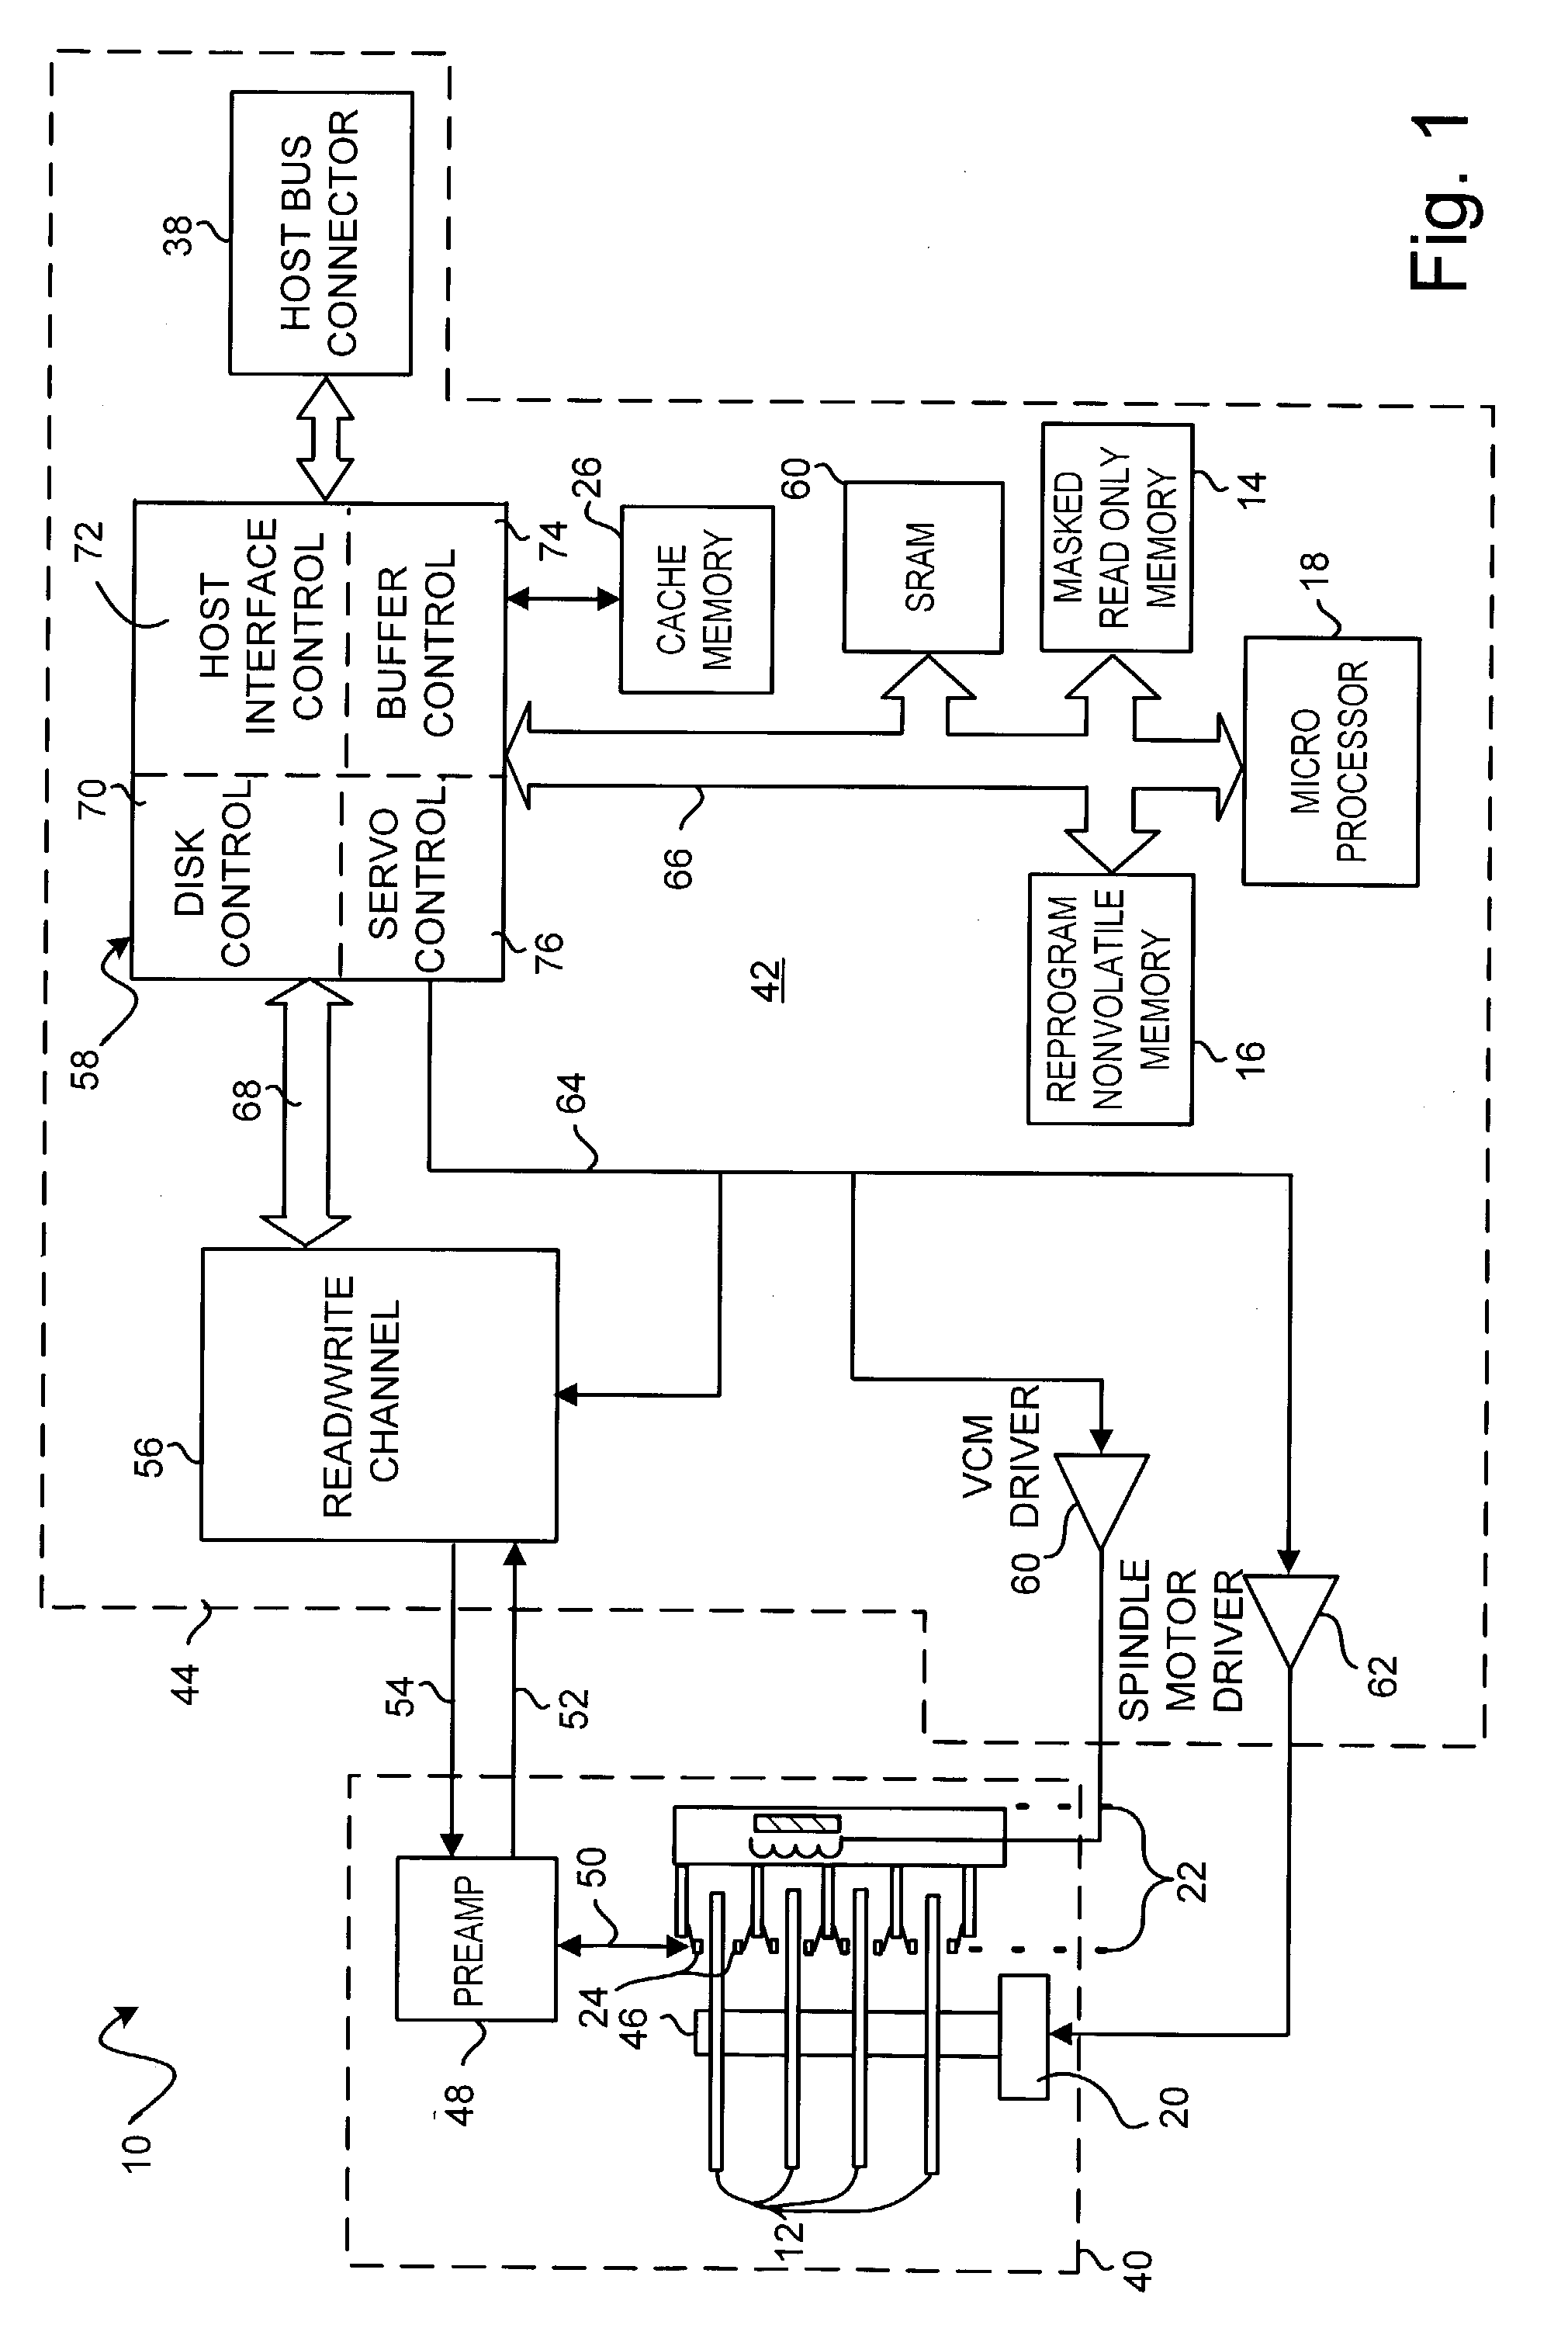 Disk drive and method having cost-effective storage of the disk drive's internal program code